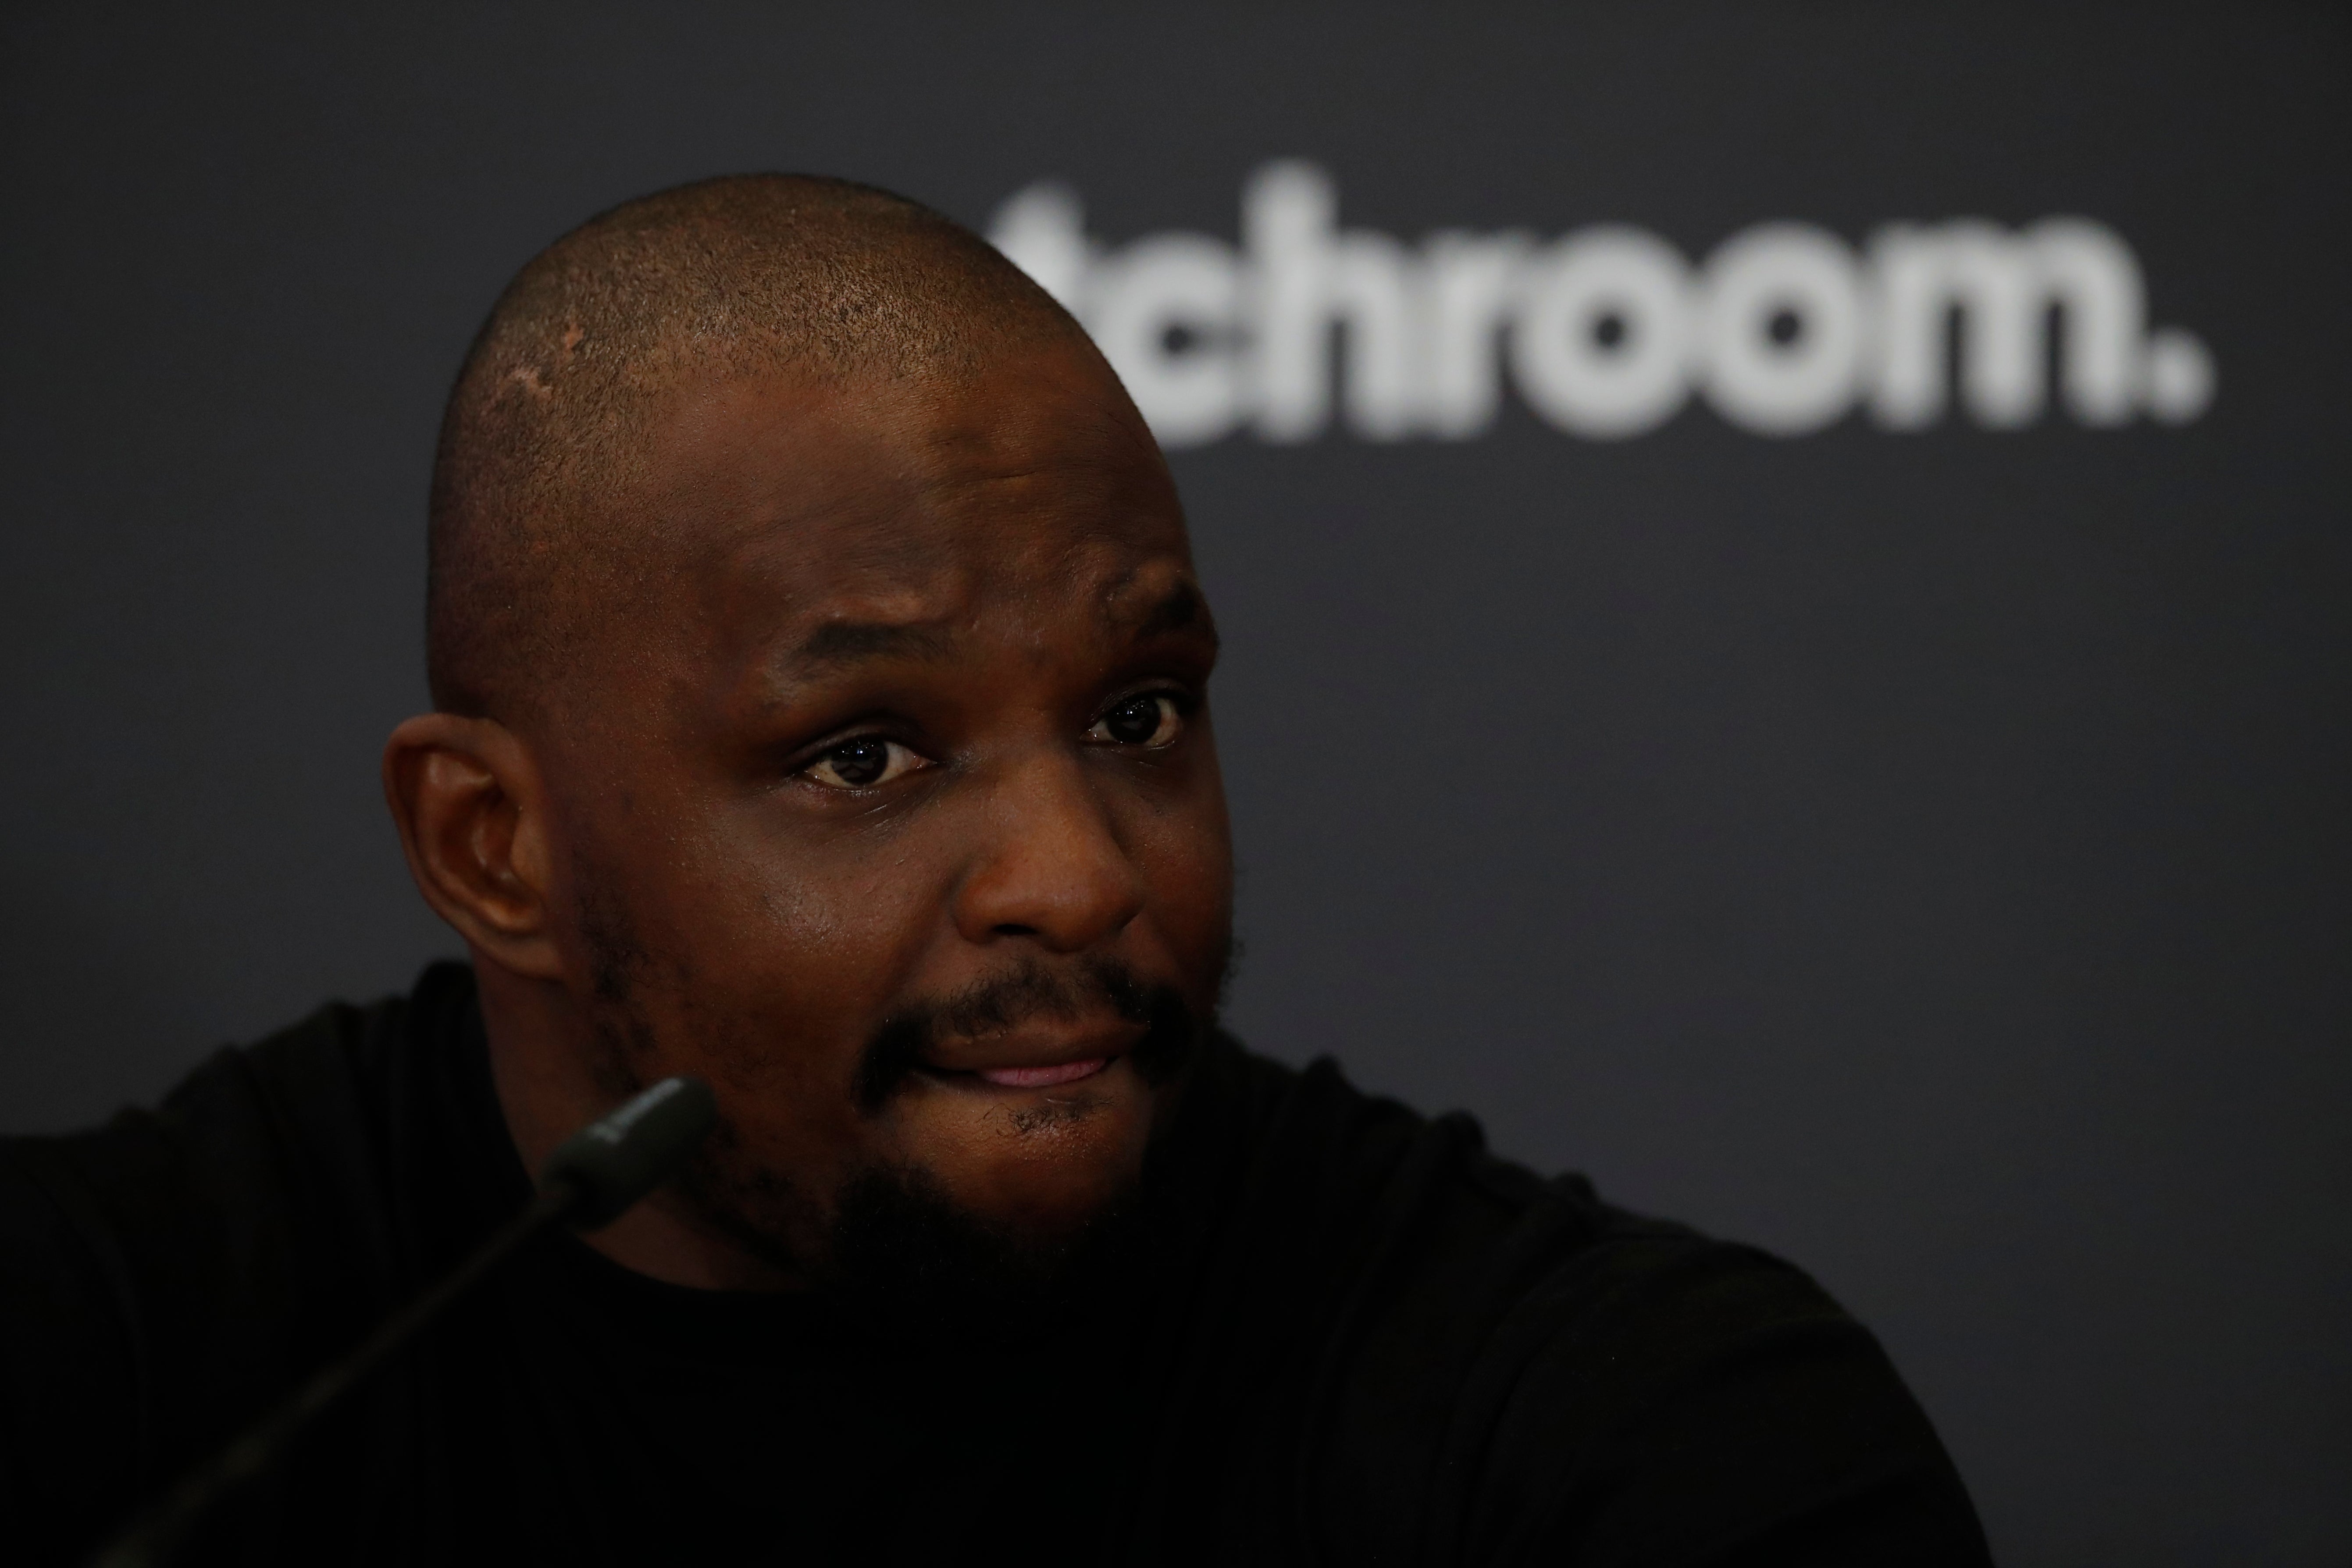 Dillian Whyte is set for a long-awaited title shot